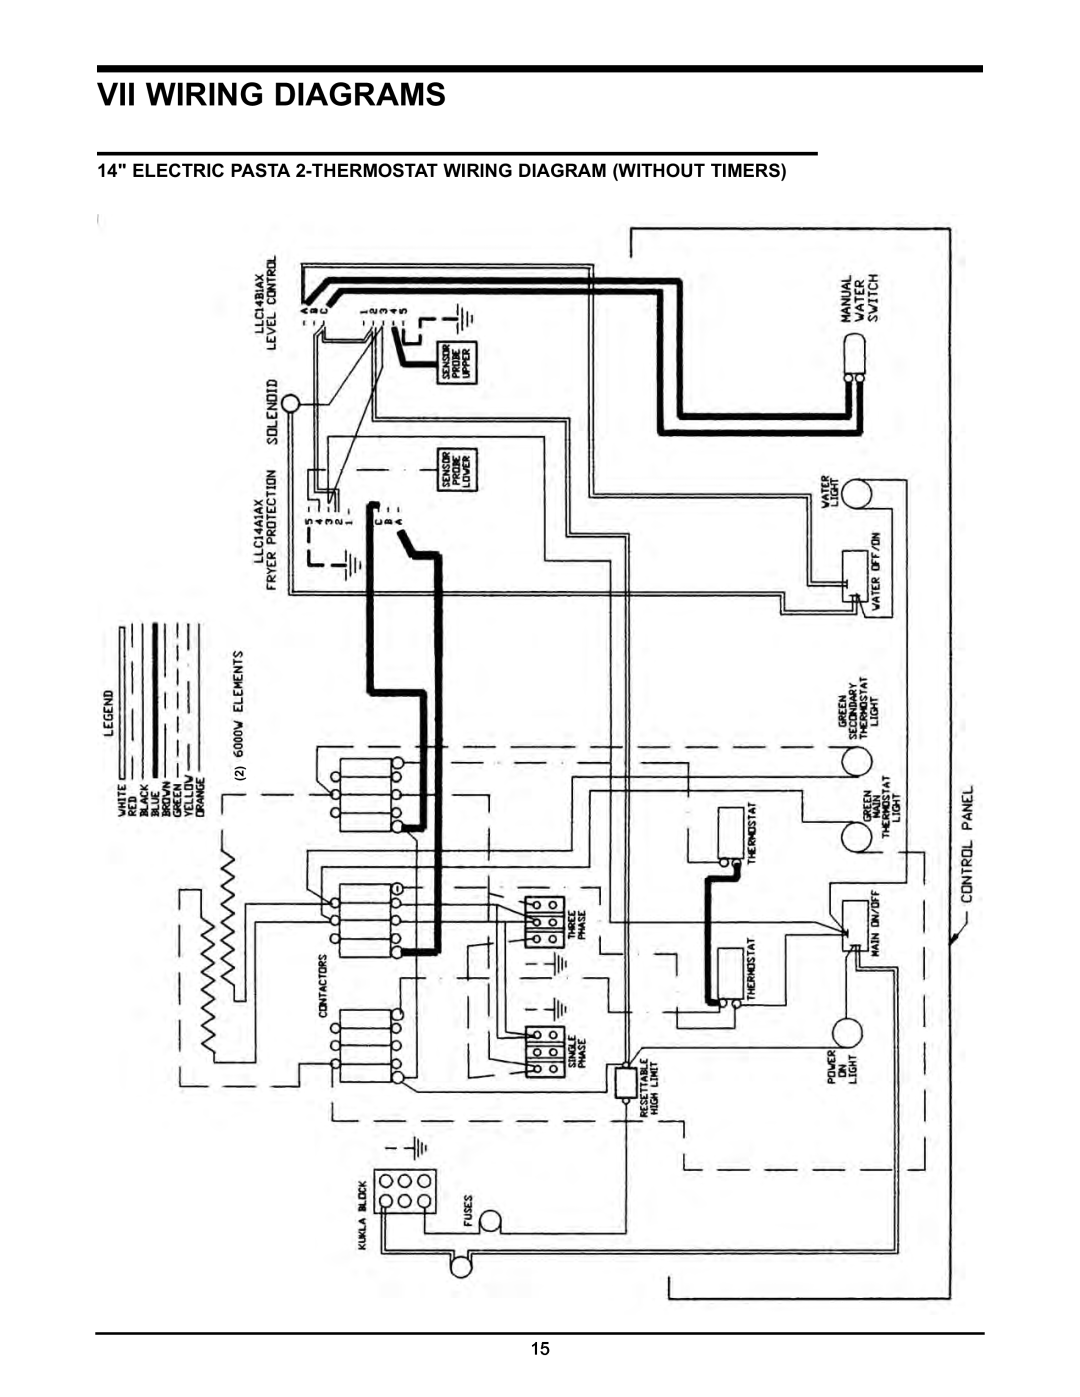 Keating Of Chicago 2009 manual Vii Wiring Diagrams, ELECTRIC PASTA 2-THERMOSTAT WIRING DIAGRAM WITHOUT TIMERS 